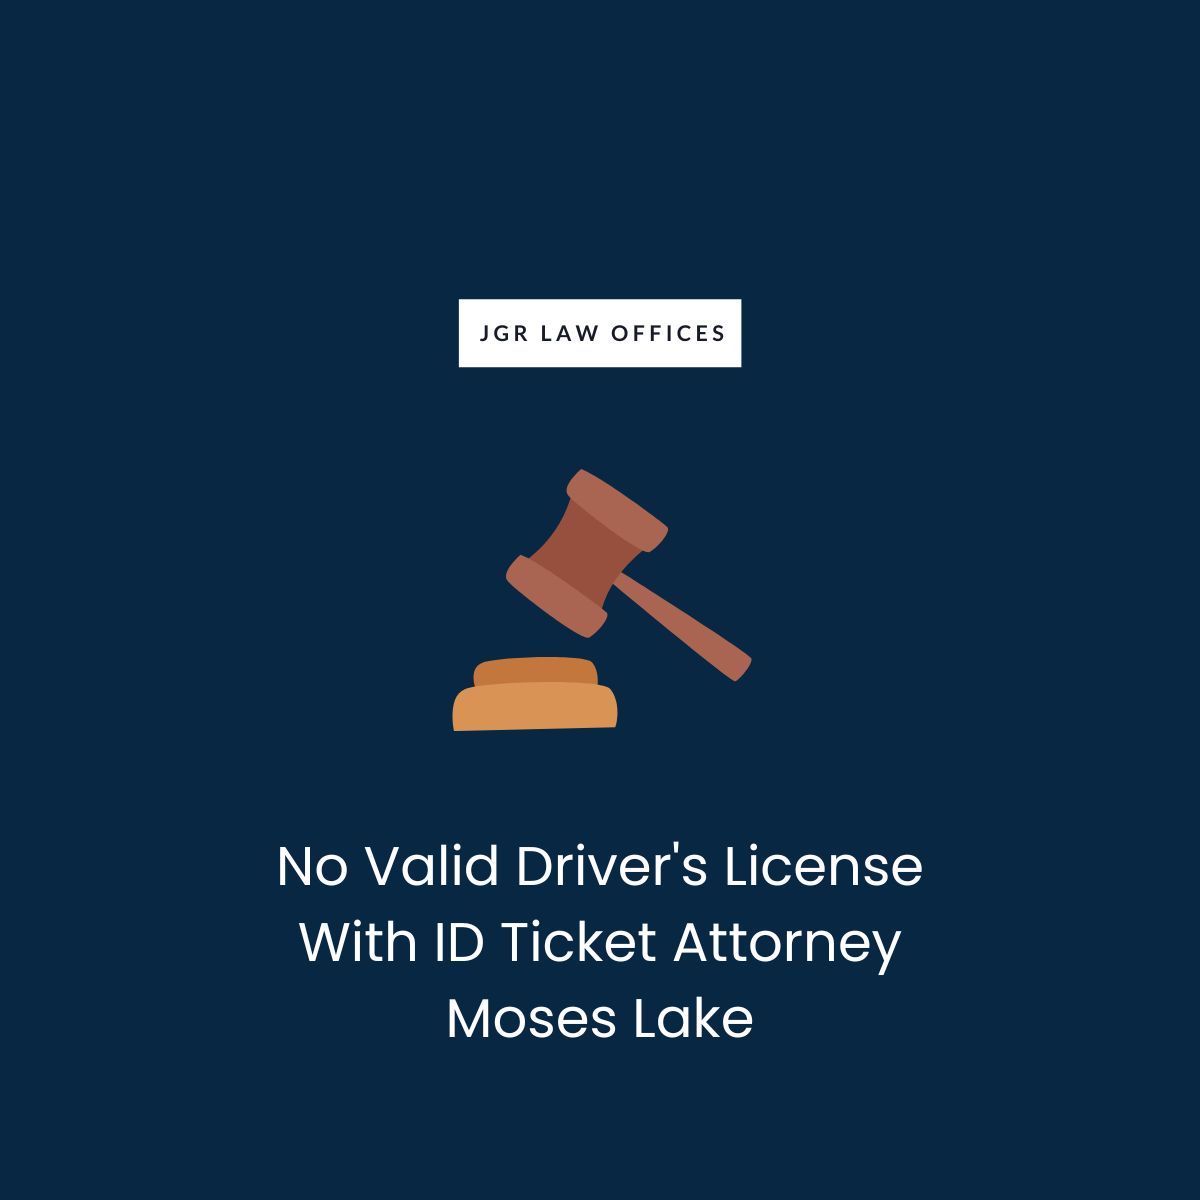 No Valid Driver's License With ID Ticket Attorney Moses Lake